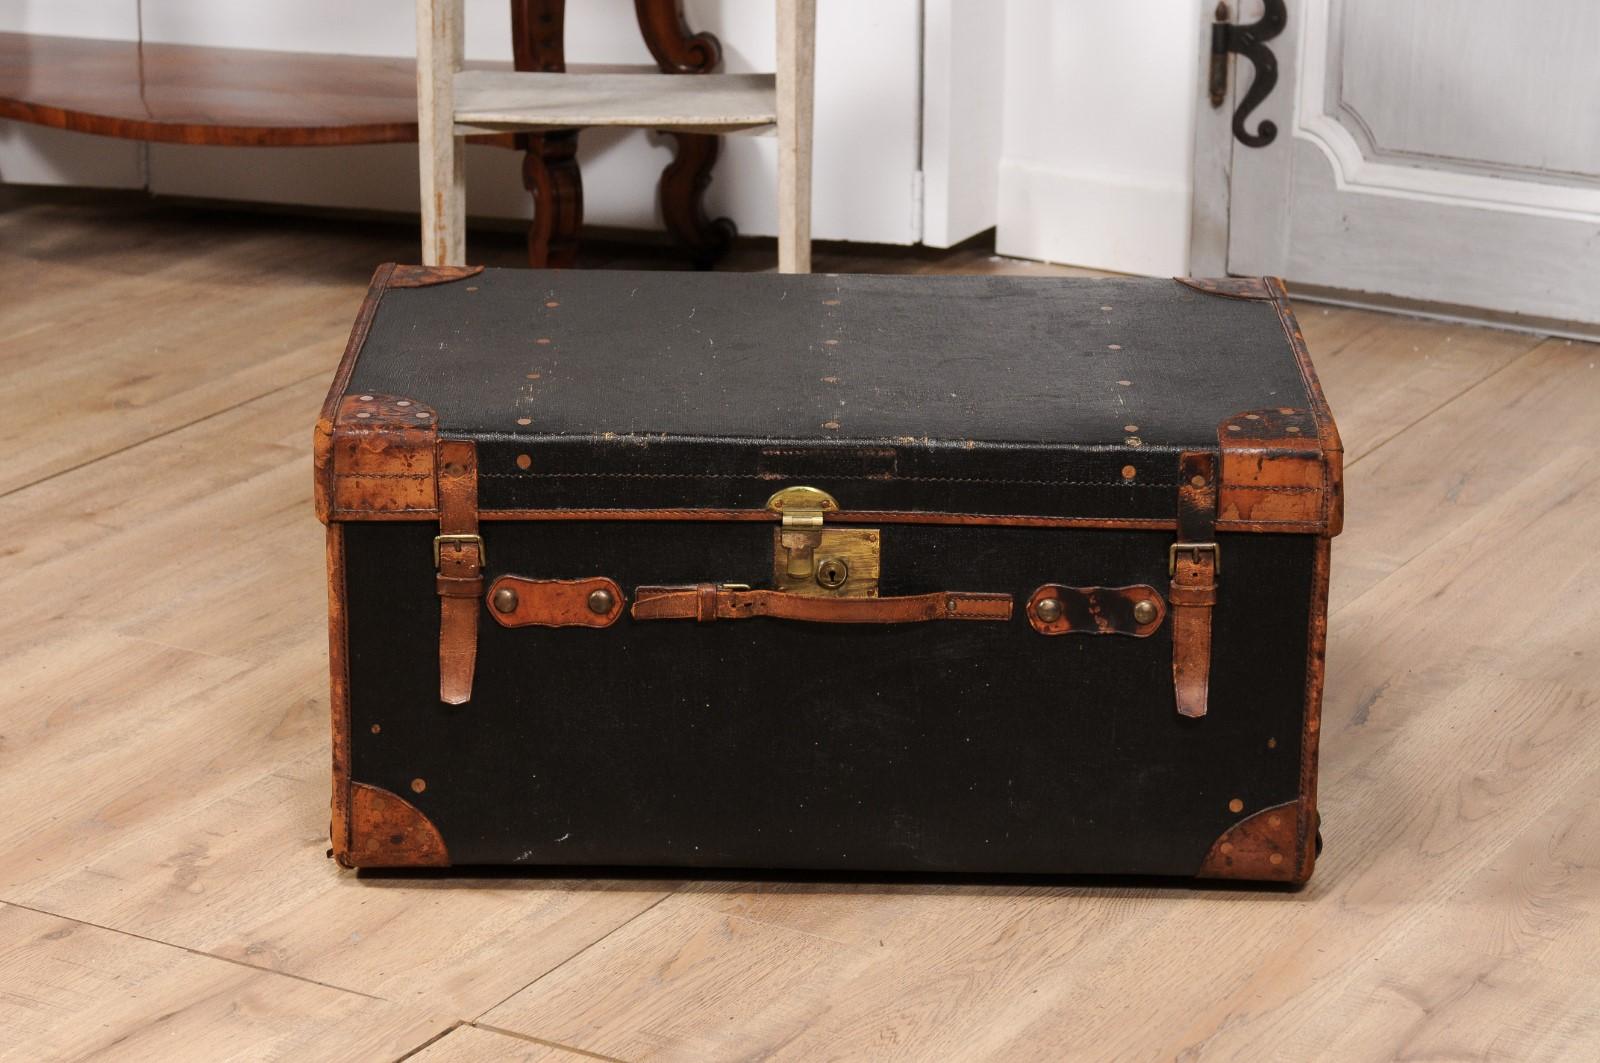 English Victorian Period 19th Century Black Traveling Trunk With Initials J.G.F. For Sale 1